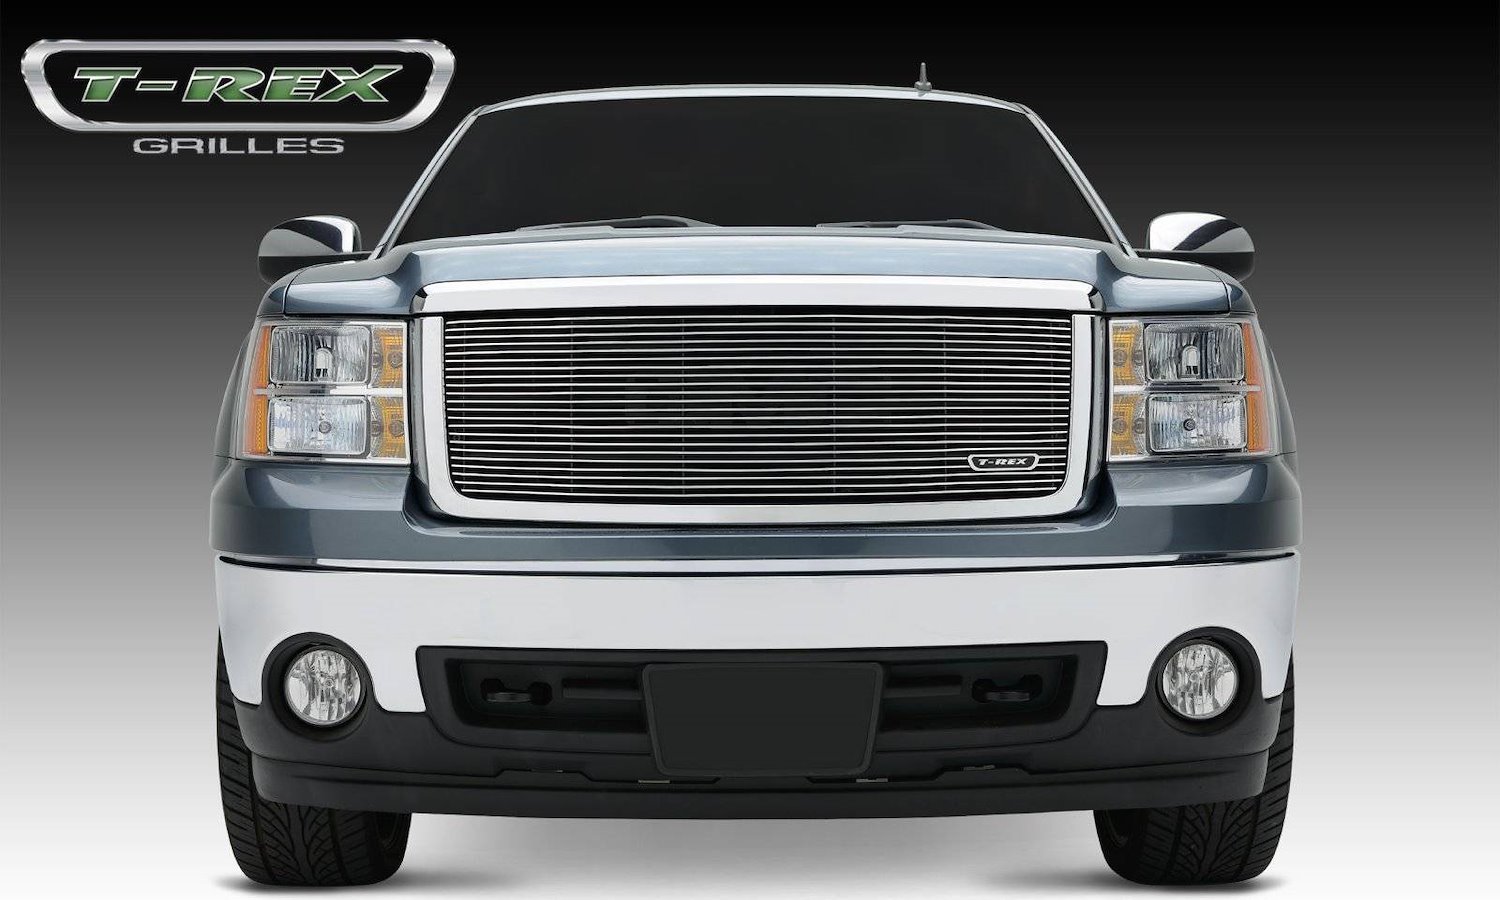 Billet Grille Insert Fits All Terrain Trim Package Only